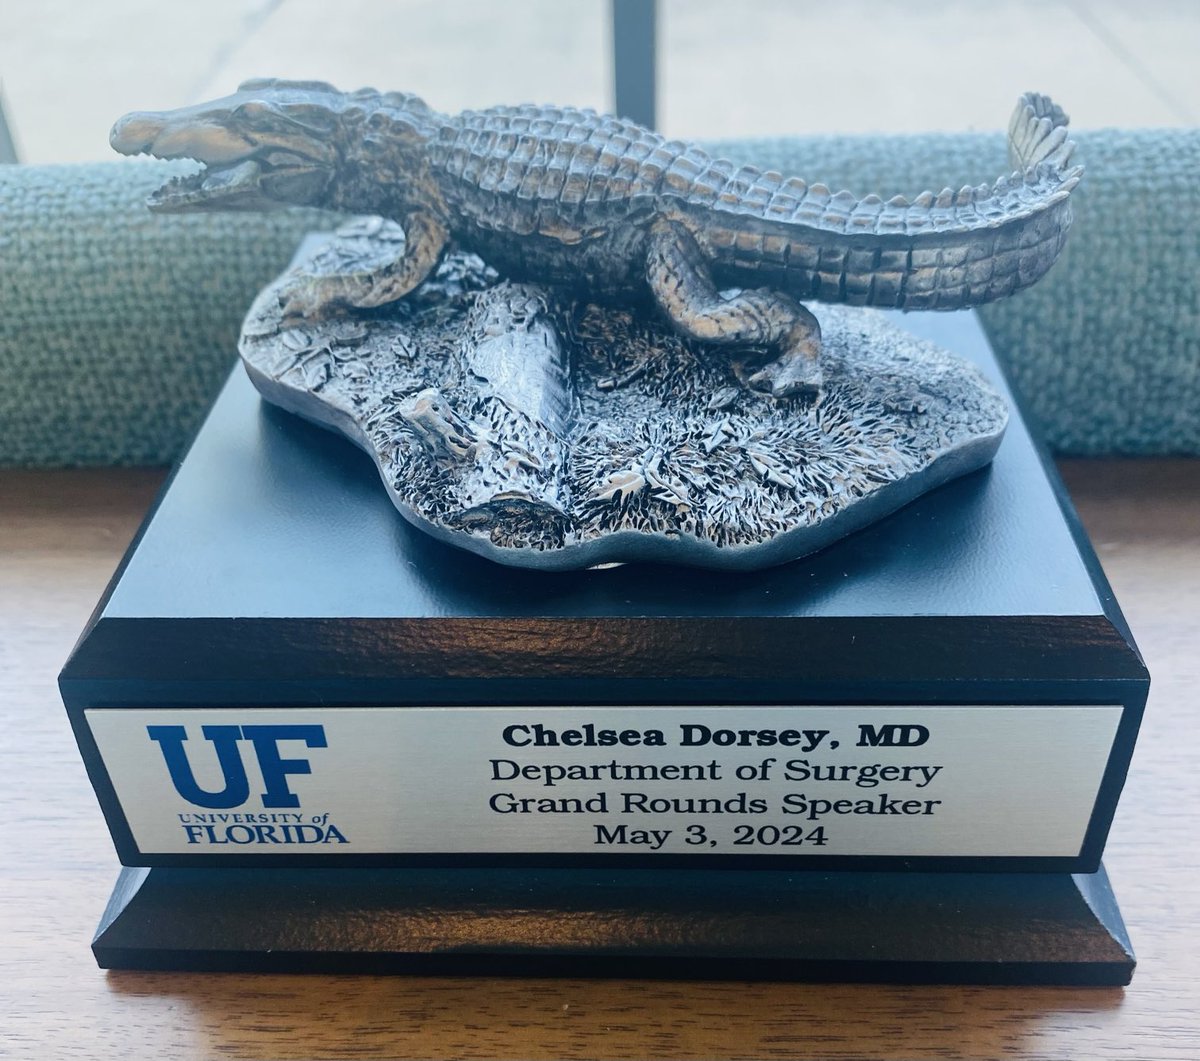 What a fantastic experience!! Thanks for the invite ⁦@UFSurgery⁩ ❤️ Honored to serve as a visiting professor. Had a great time meeting the ⁦@UFSurgResidents⁩ and faculty…and a gator for my office! What more could a gal ask for 🫶🏾